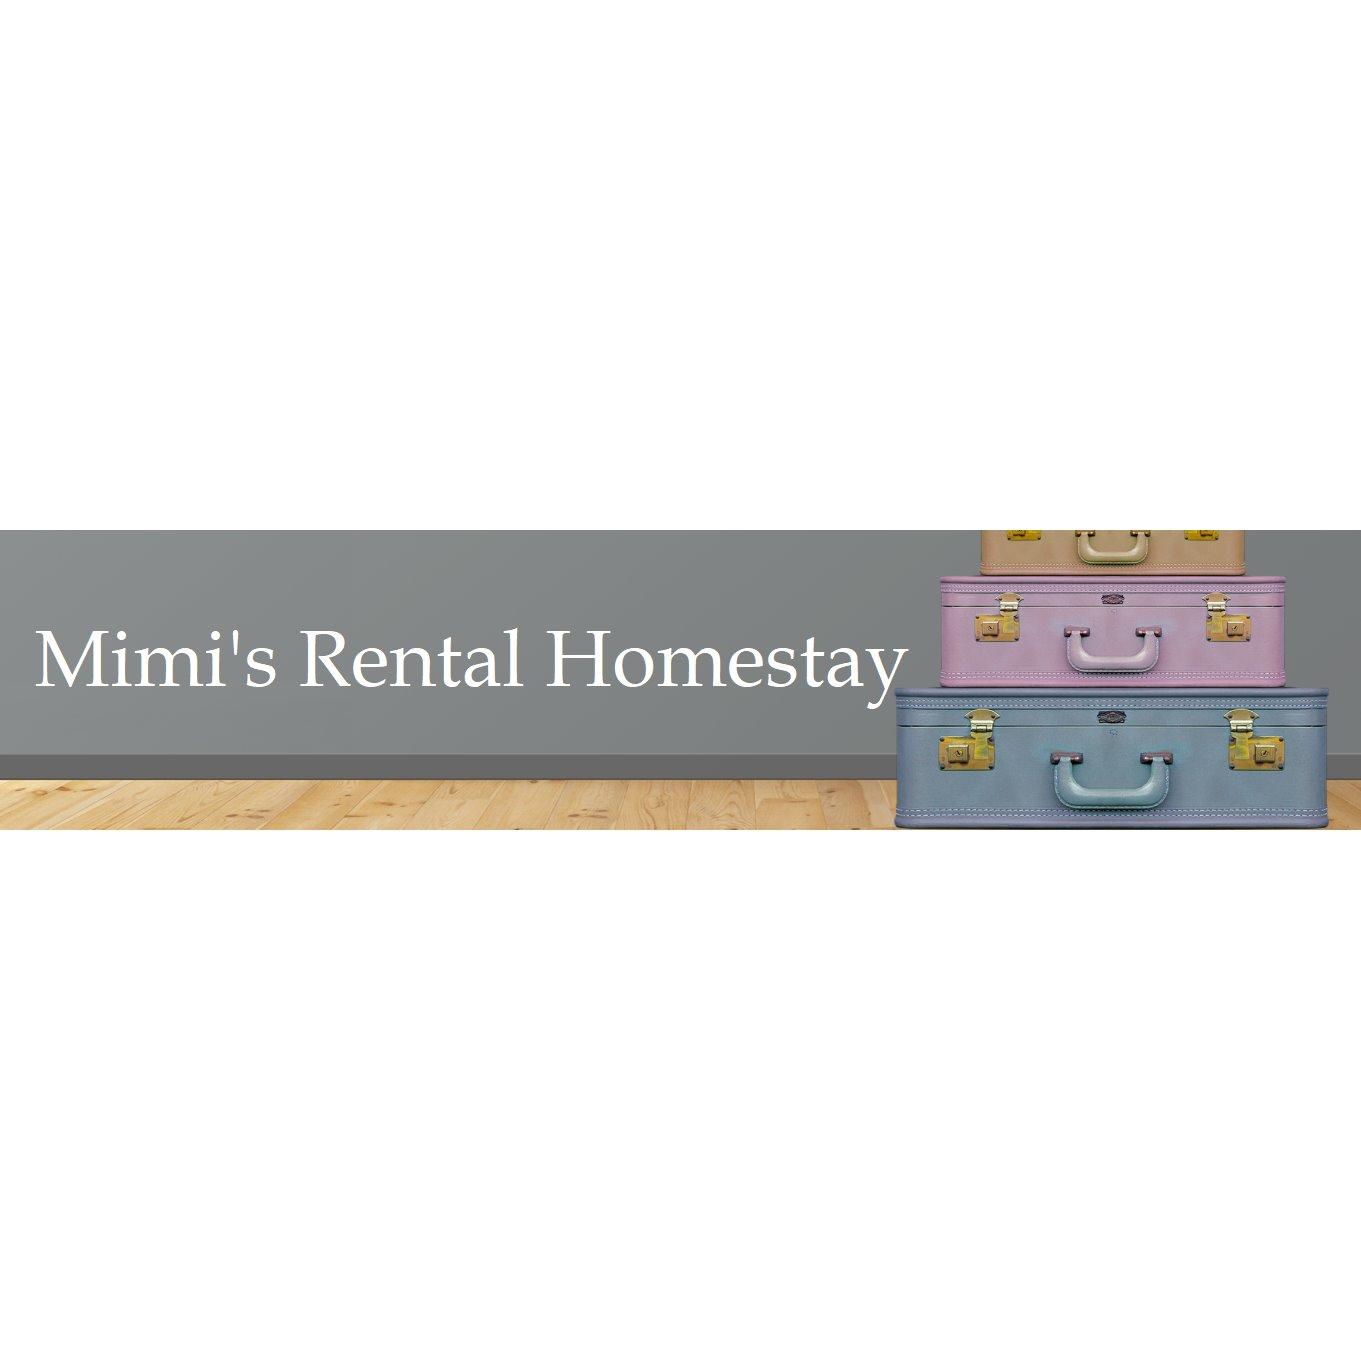 Mimi's Rental Guesthouse